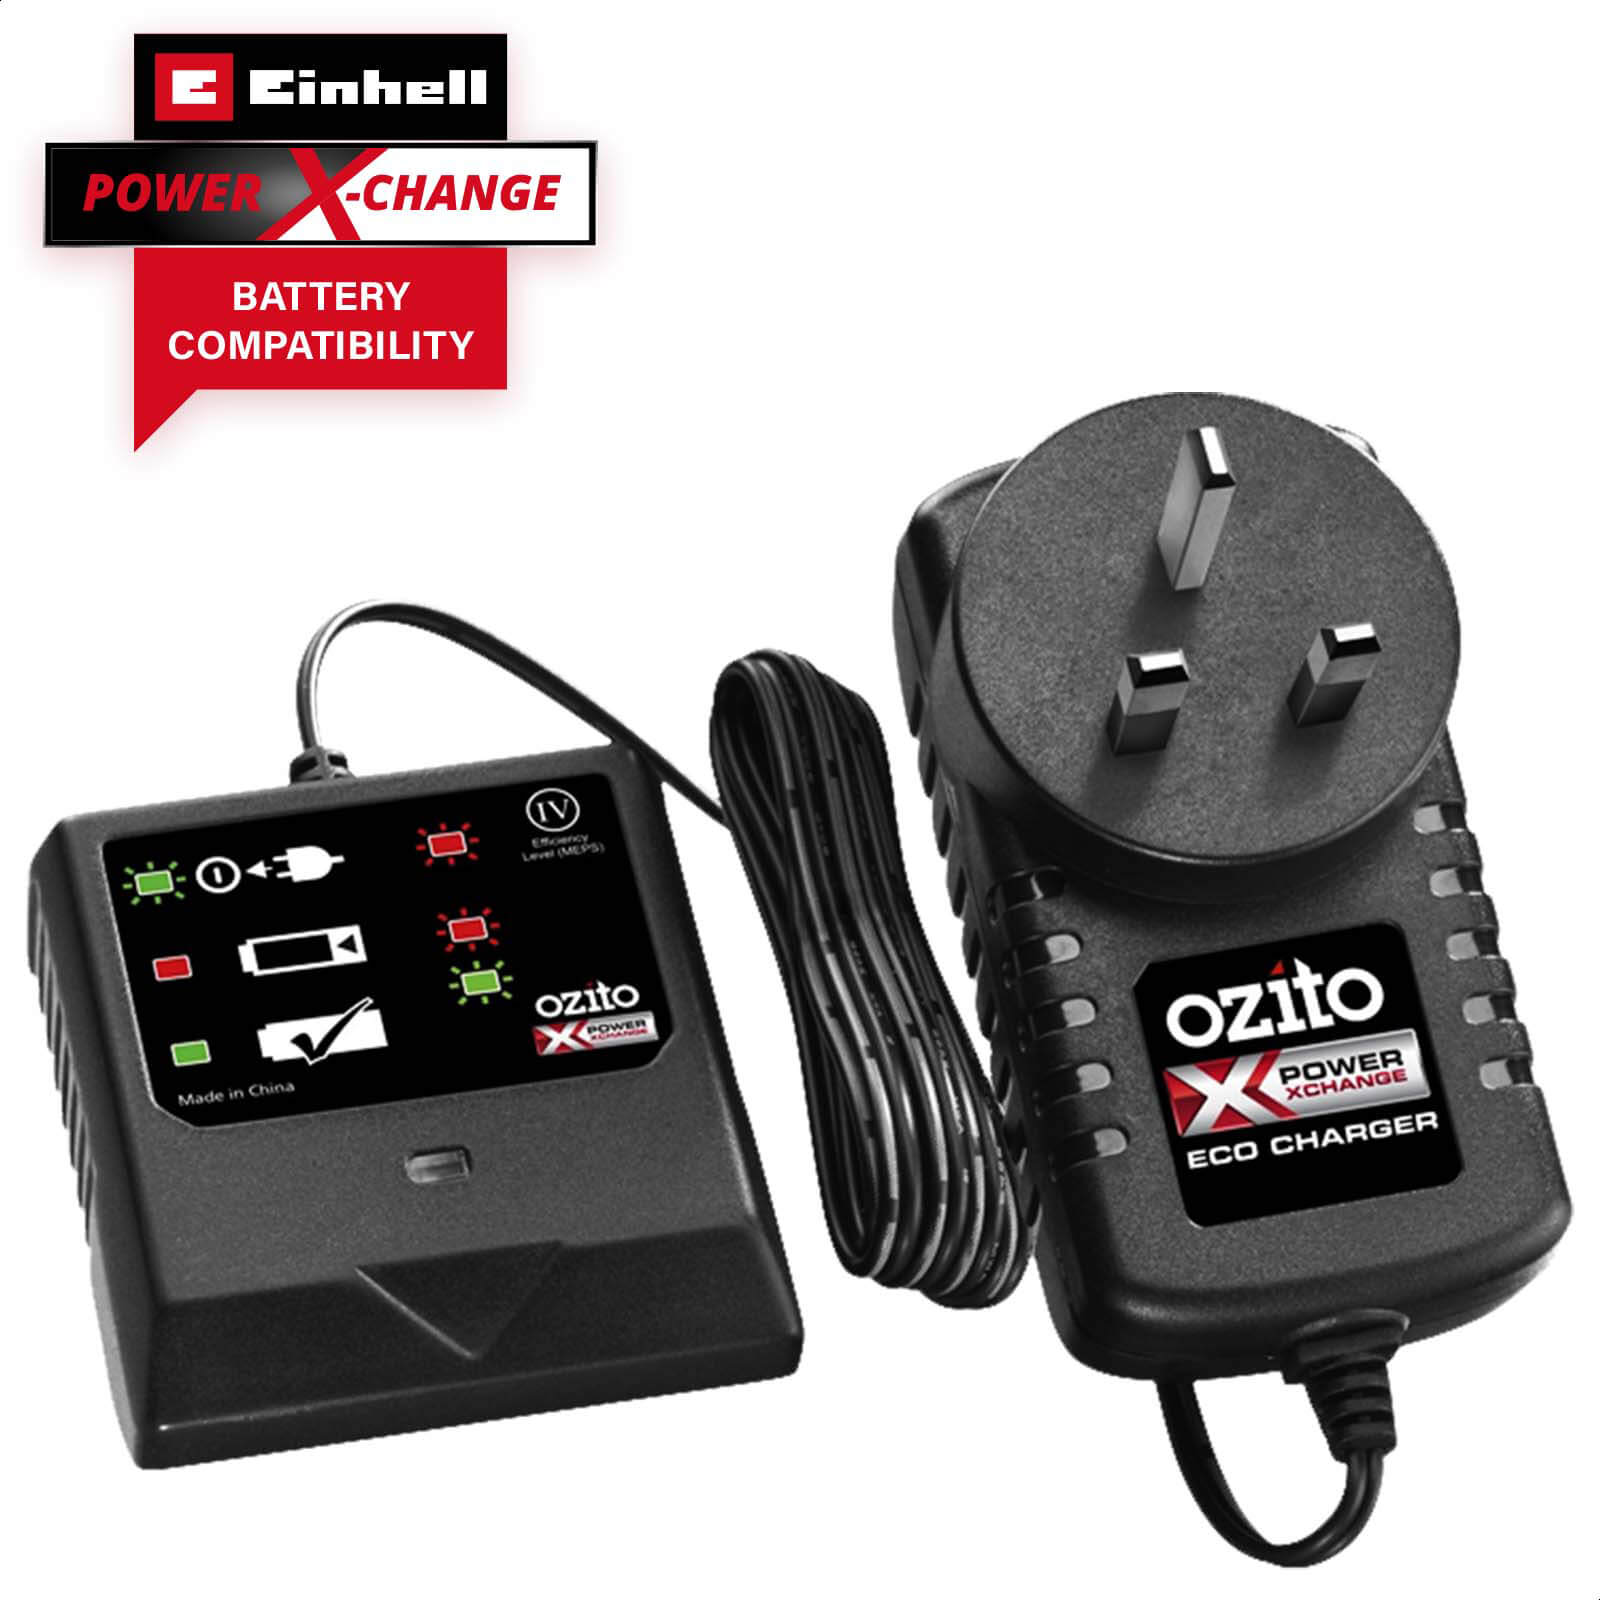 Image of Ozito Genuine 18v Cordless Power X-Change Eco Battery Charger